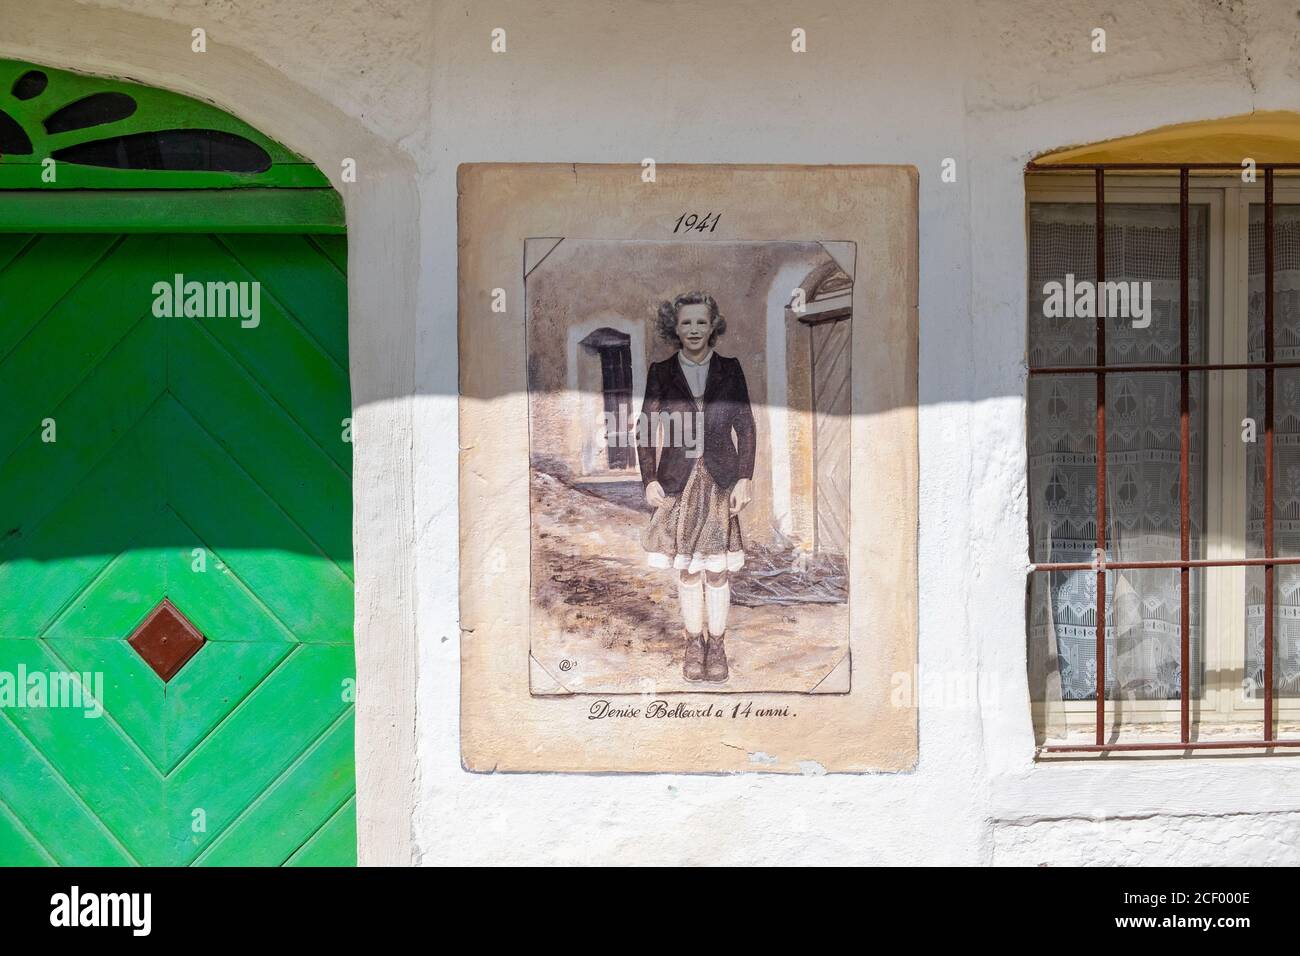 Painted mural of a resident in 1941 of the small village of Usseaux, Piemonte,Italy Stock Photo